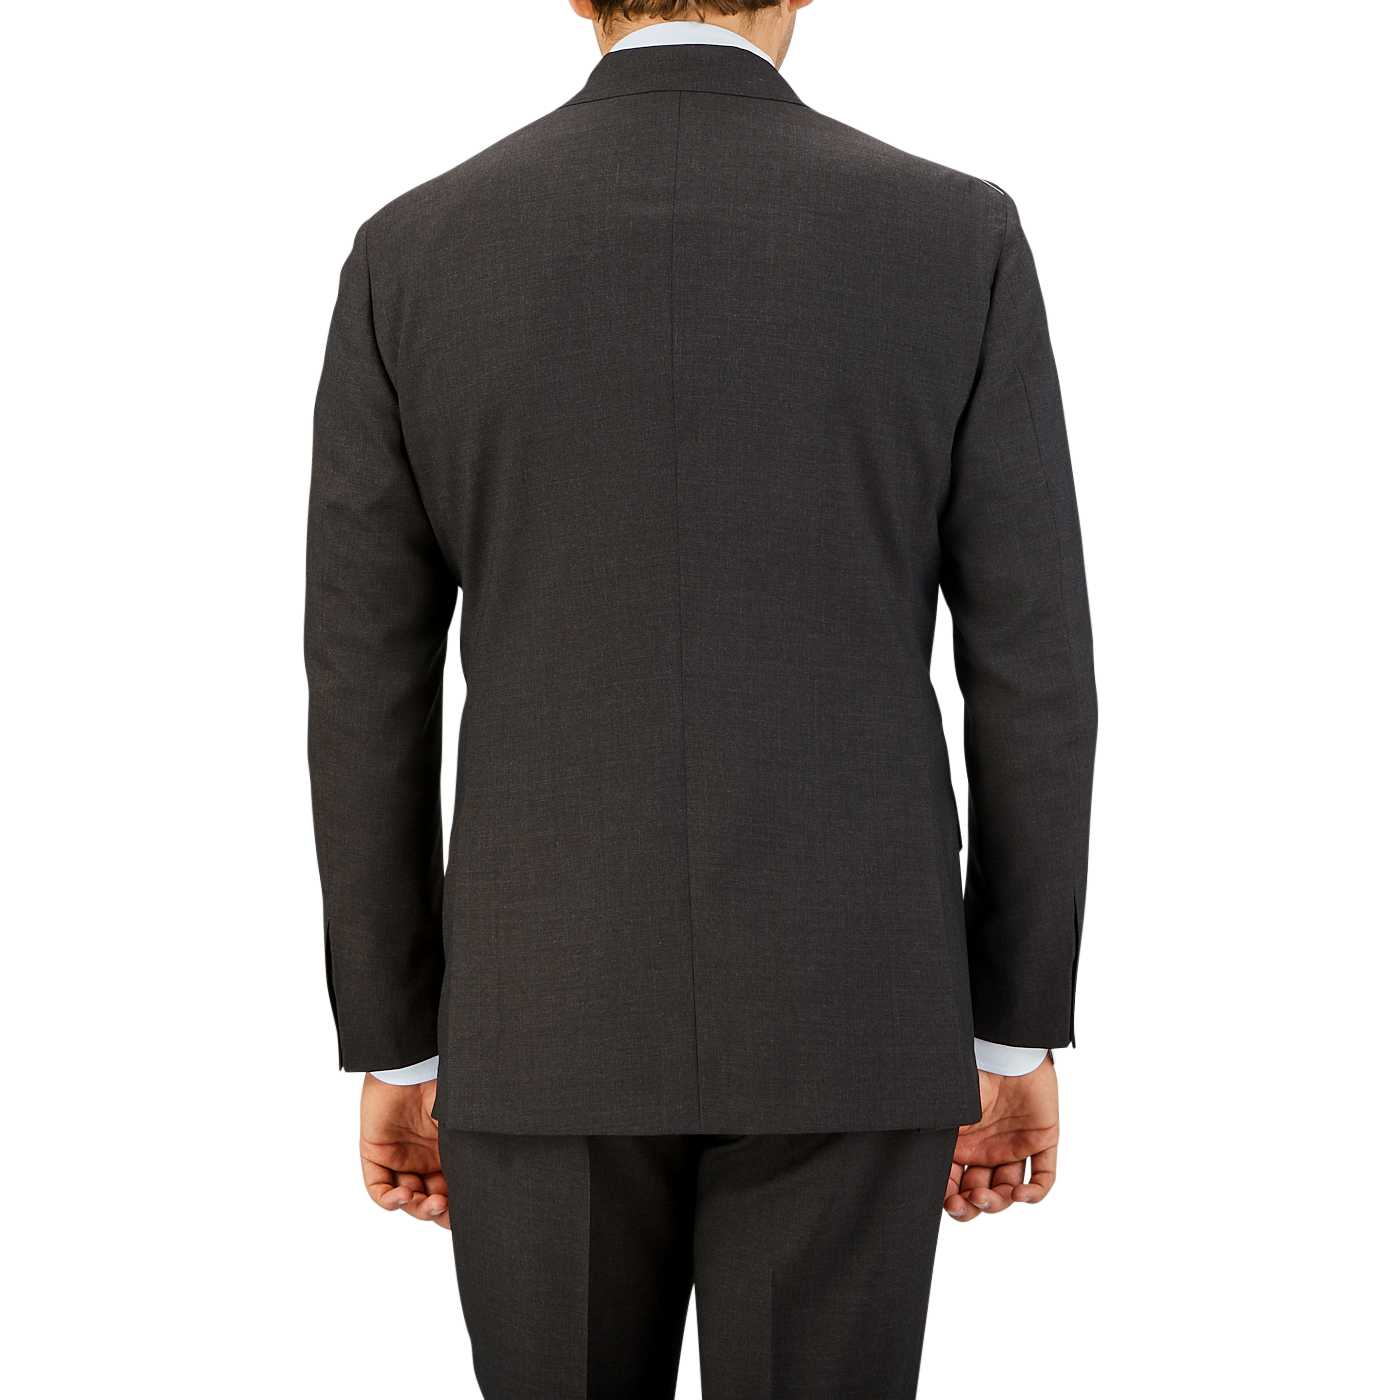 Rear view of a man in a Ring Jacket Dark Brown High Twist Wool Suit jacket and matching trousers, standing against a neutral background.